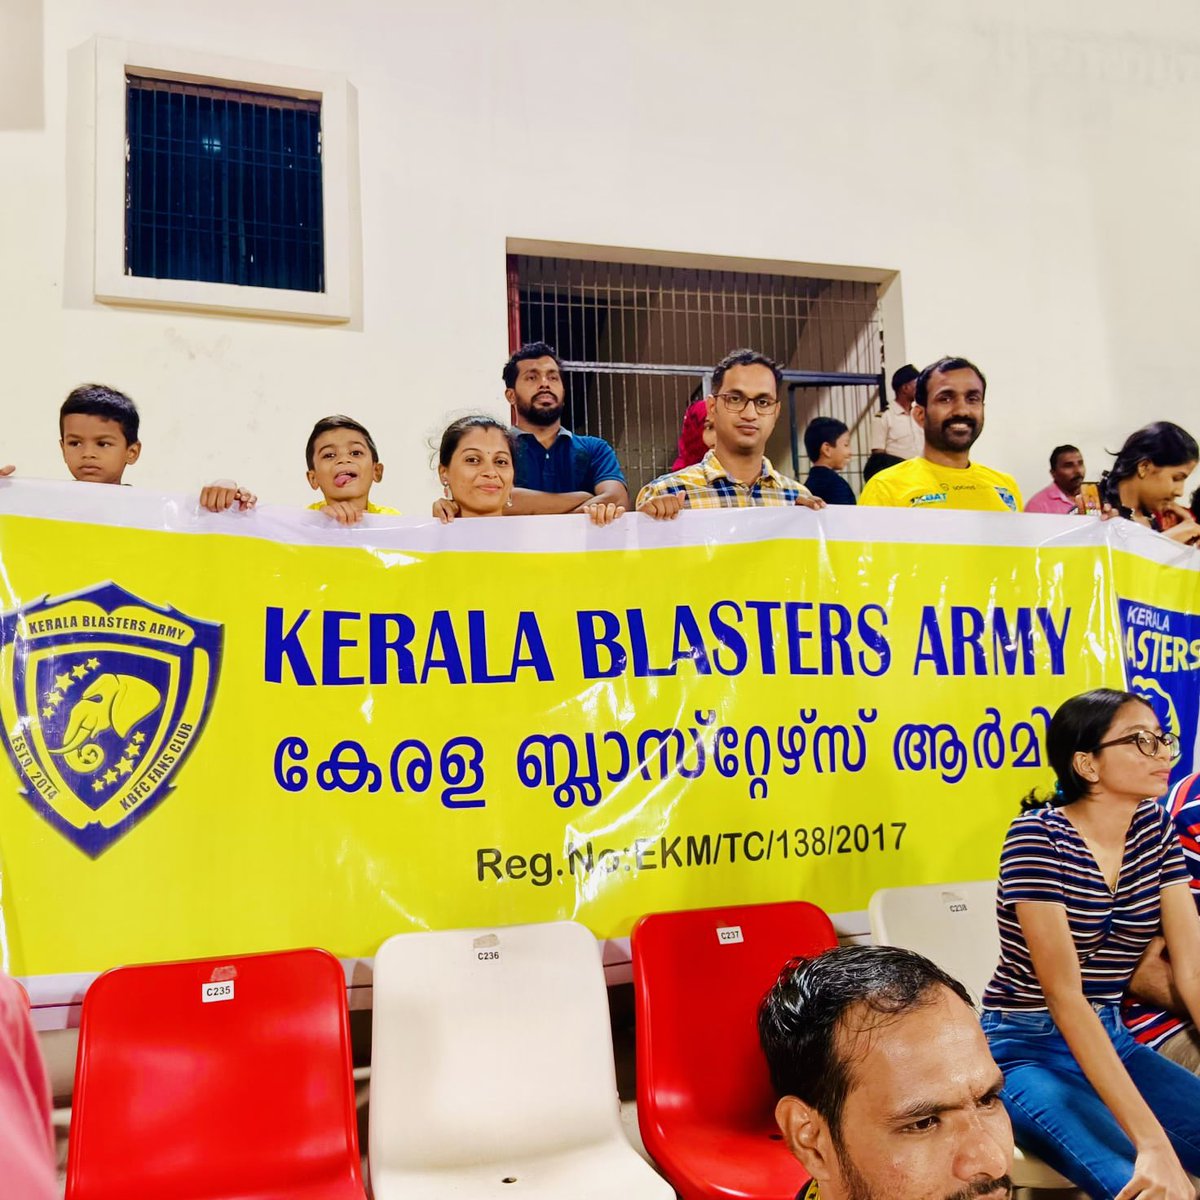 Home or Away doesn’t Matter, The Army Always there for our Team 💛🙌 . #Yennumoppamkbarmy #Keralablastersarmy #Keralablasters #ISL